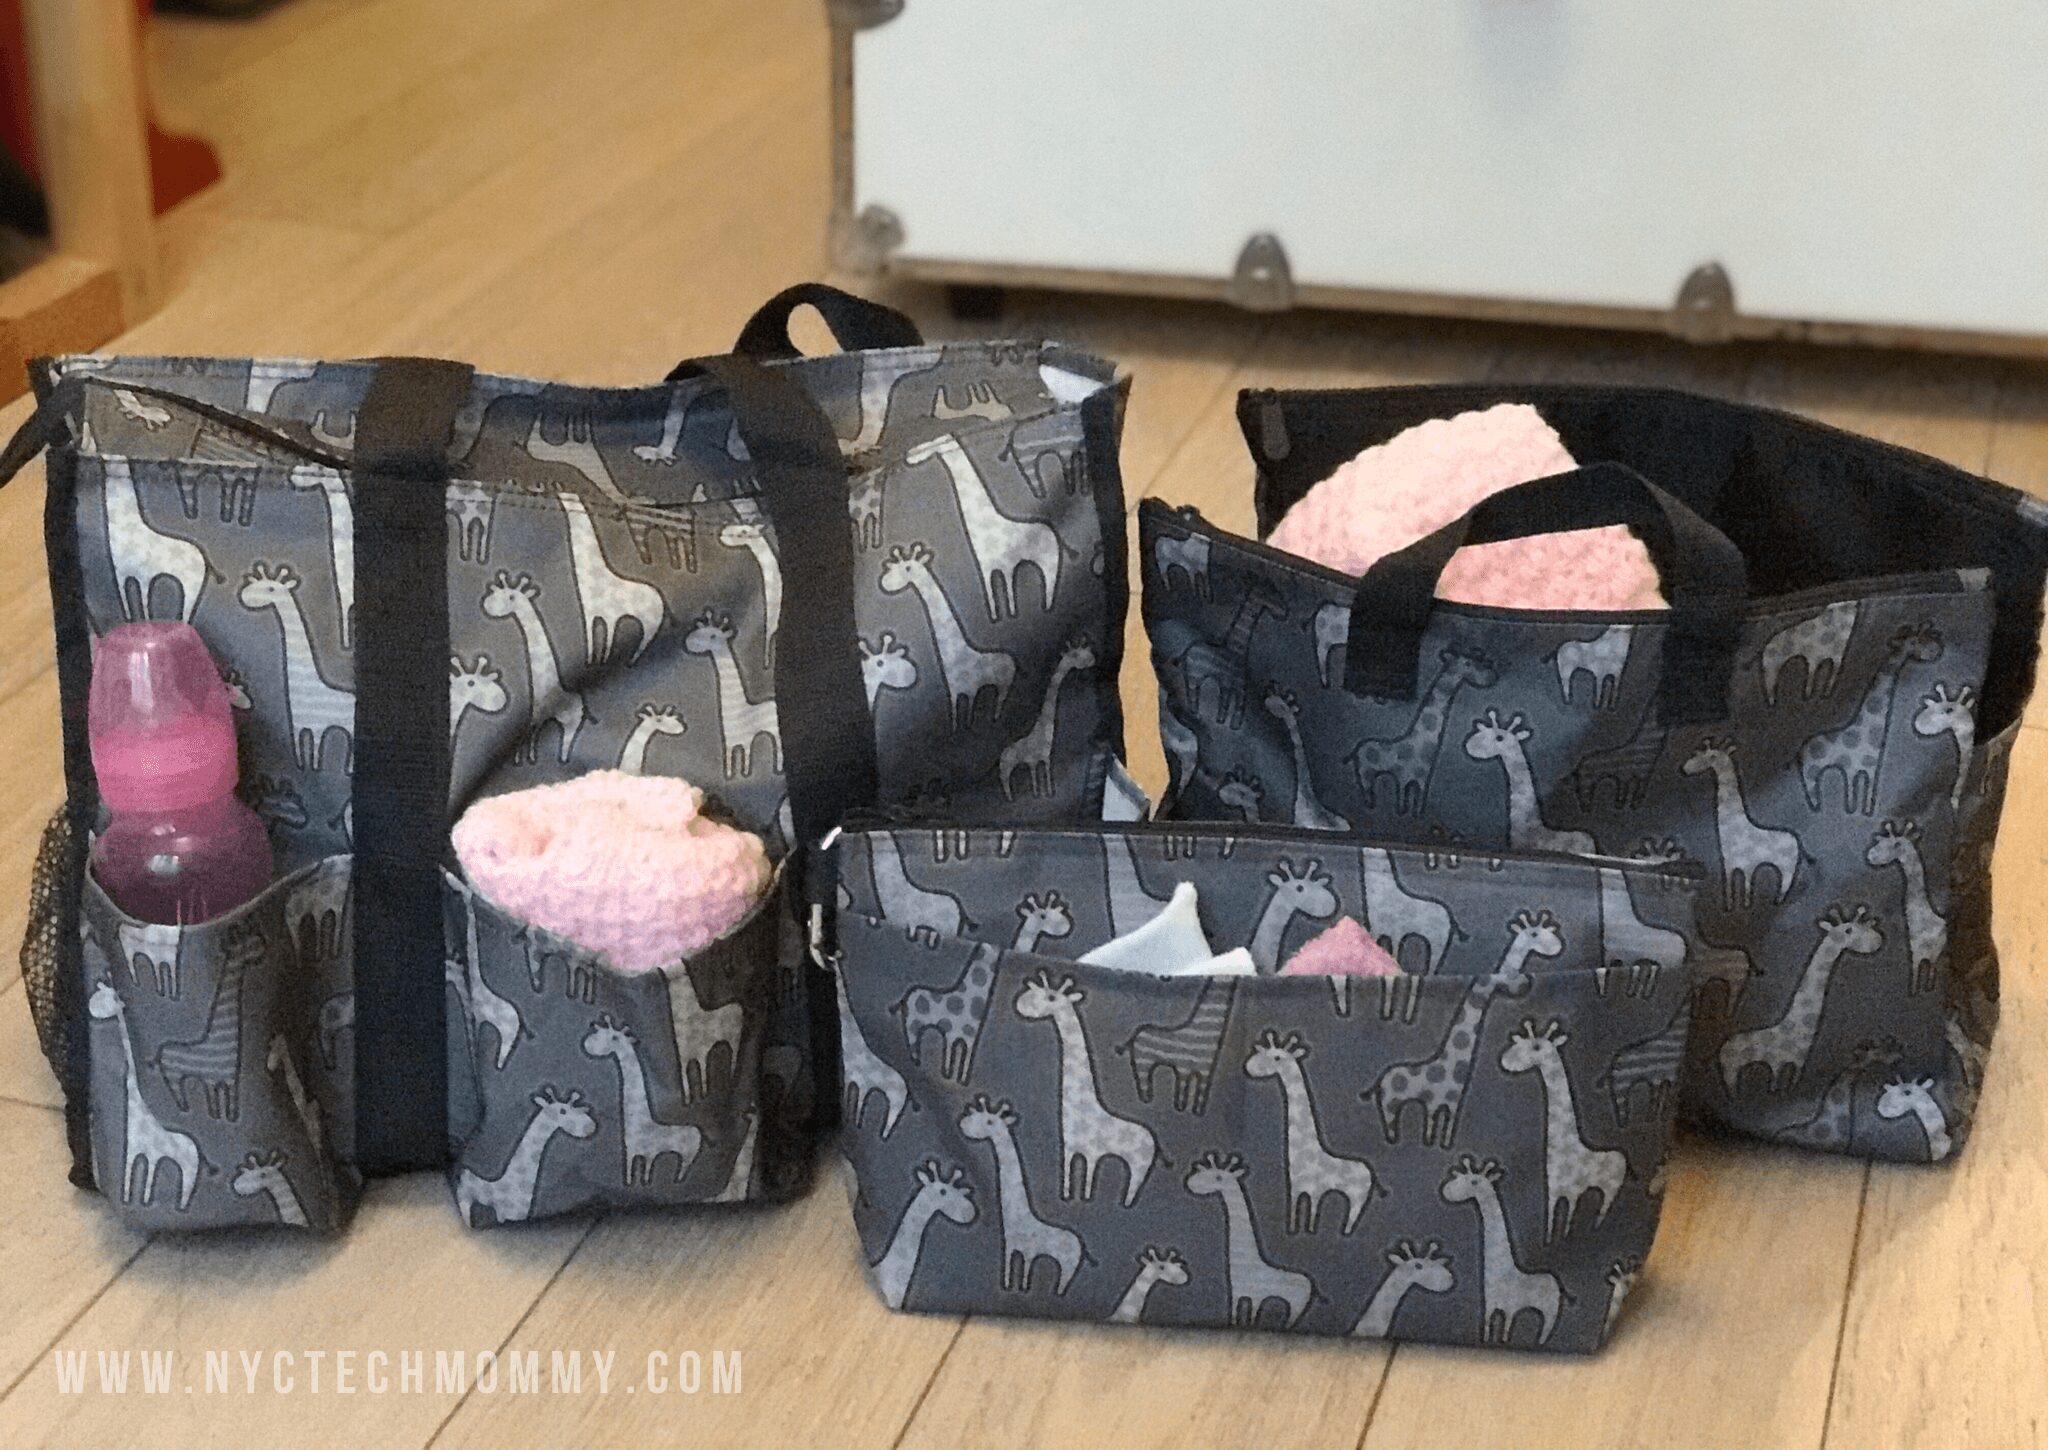 Thirty-One Gifts - The Zip-Top Organizing Utility Tote is the same as our  Organizing Utility Tote with an added zipper! Get the Zip-Top Utility Tote  this month for just $10 when you